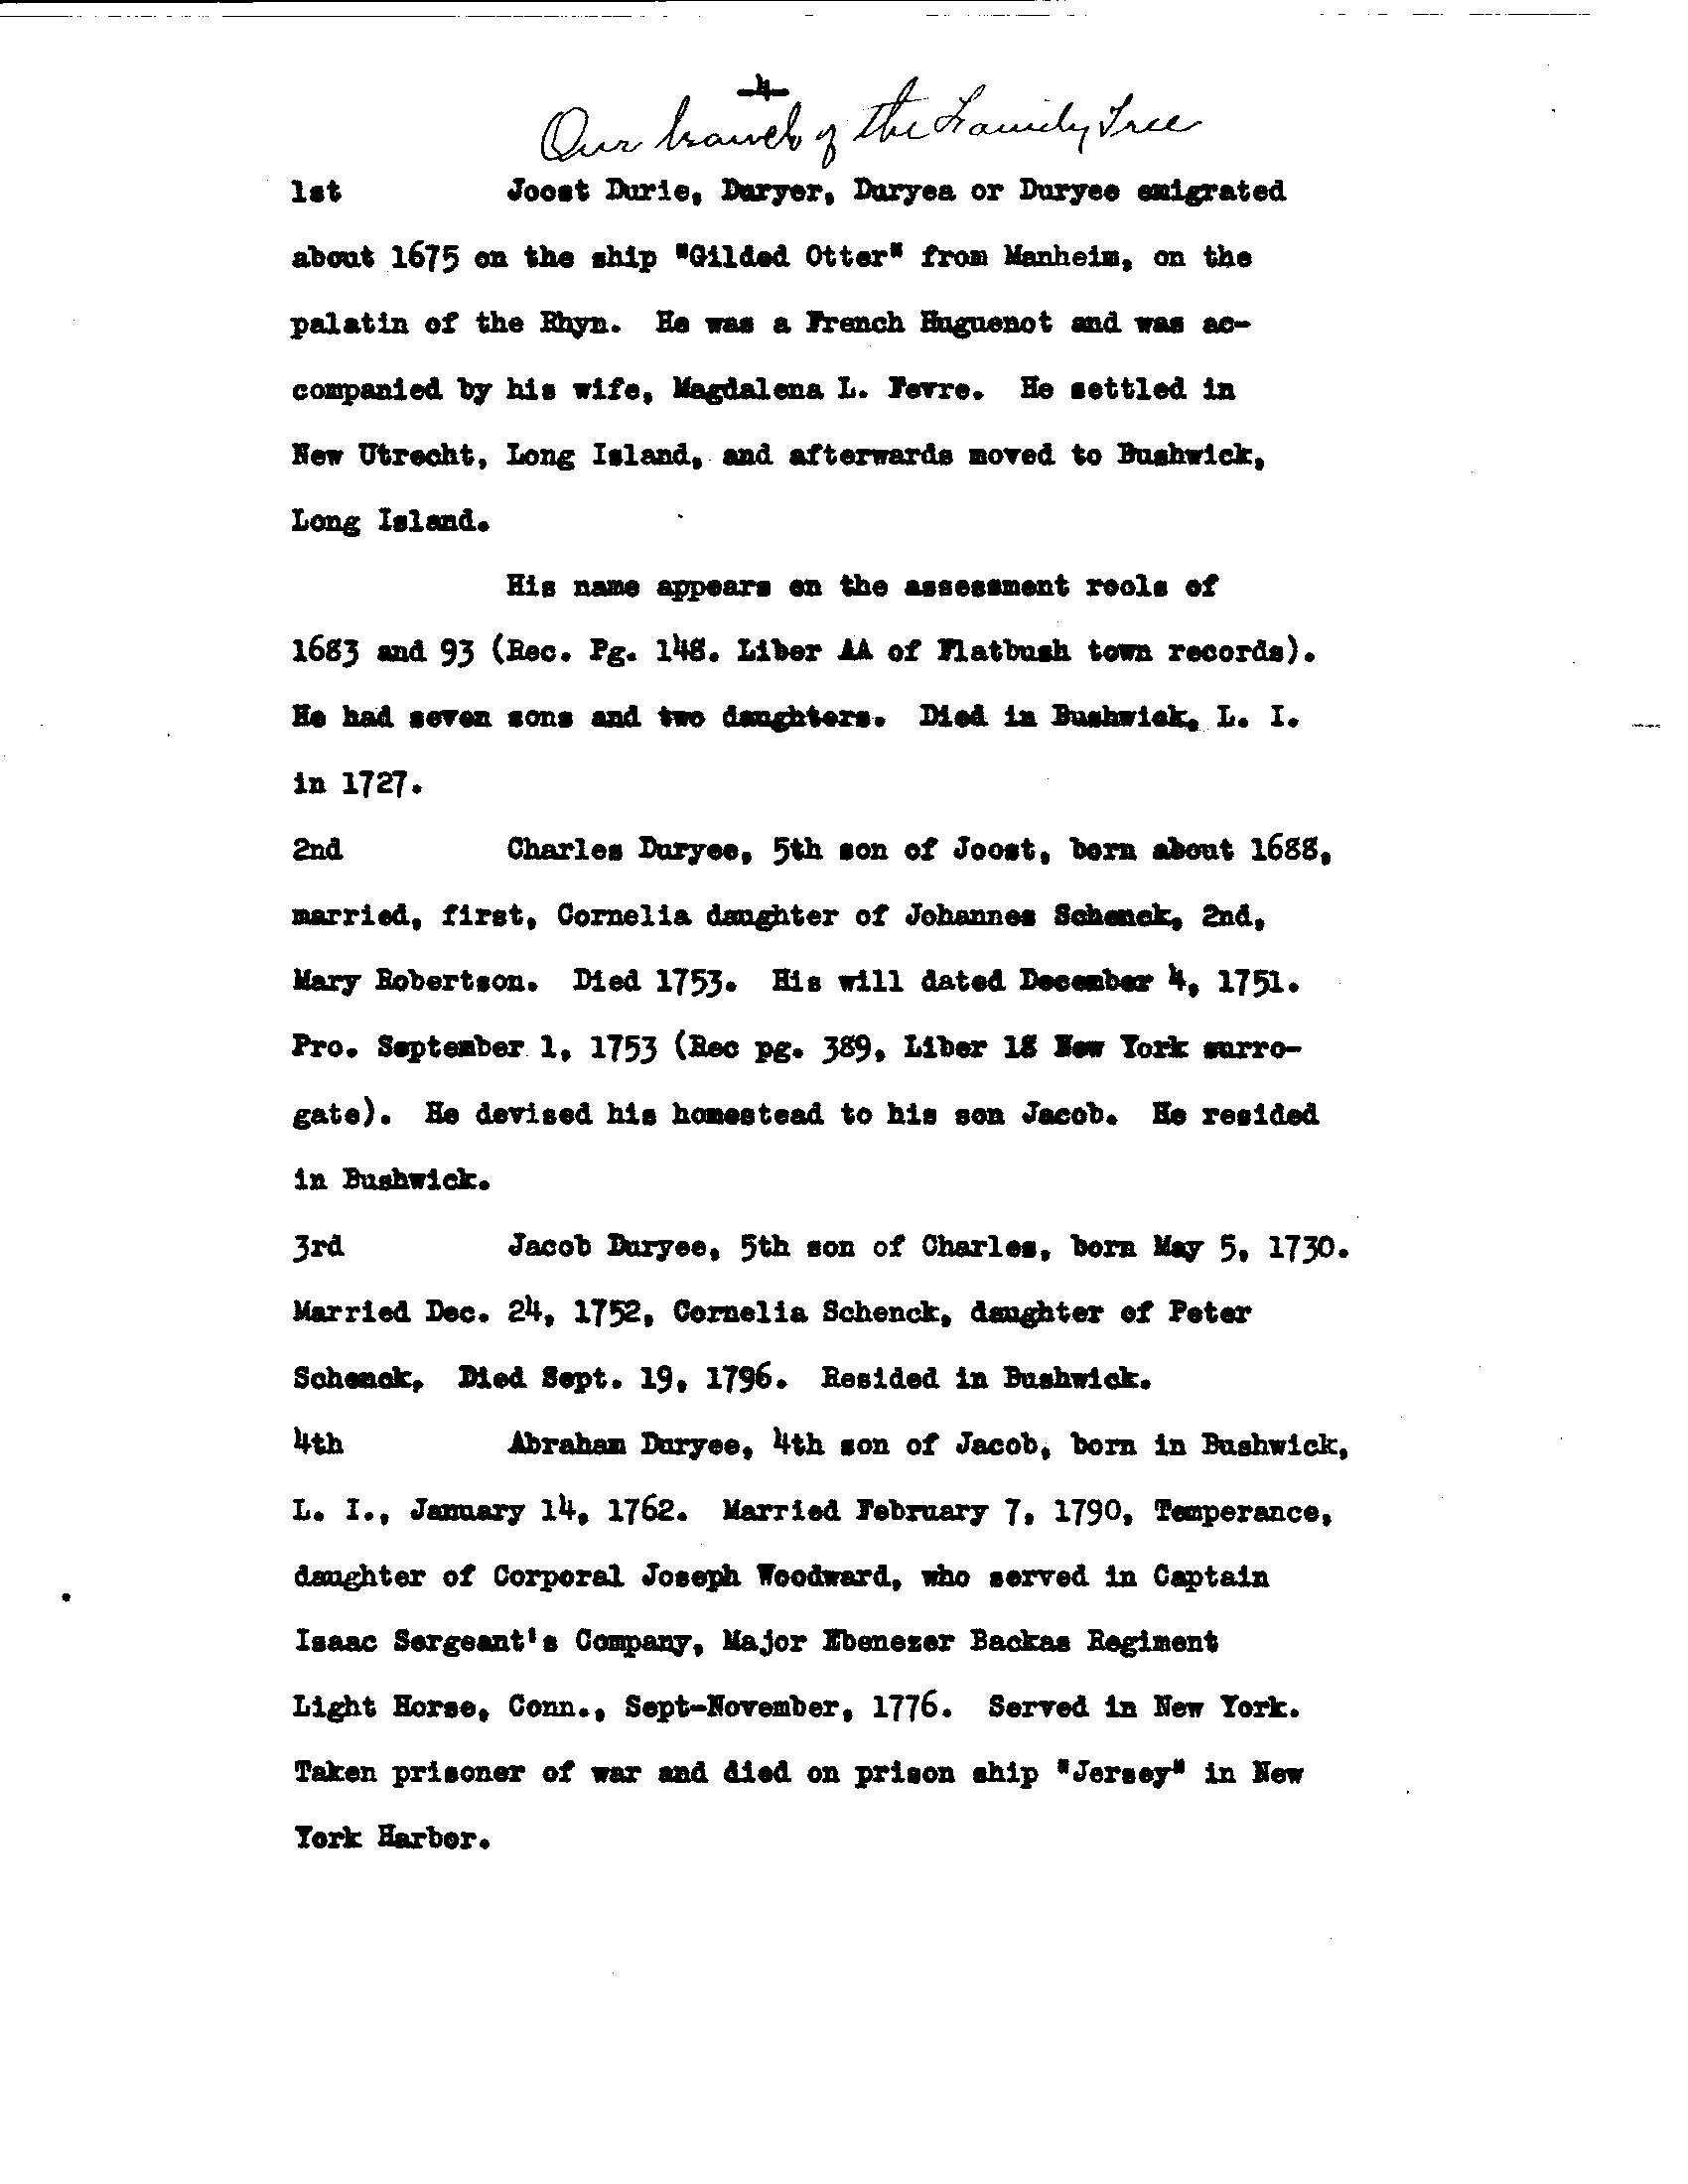 Peabodys and Duryees - Our Branch of the Family Tree (1) - December 6, 1939